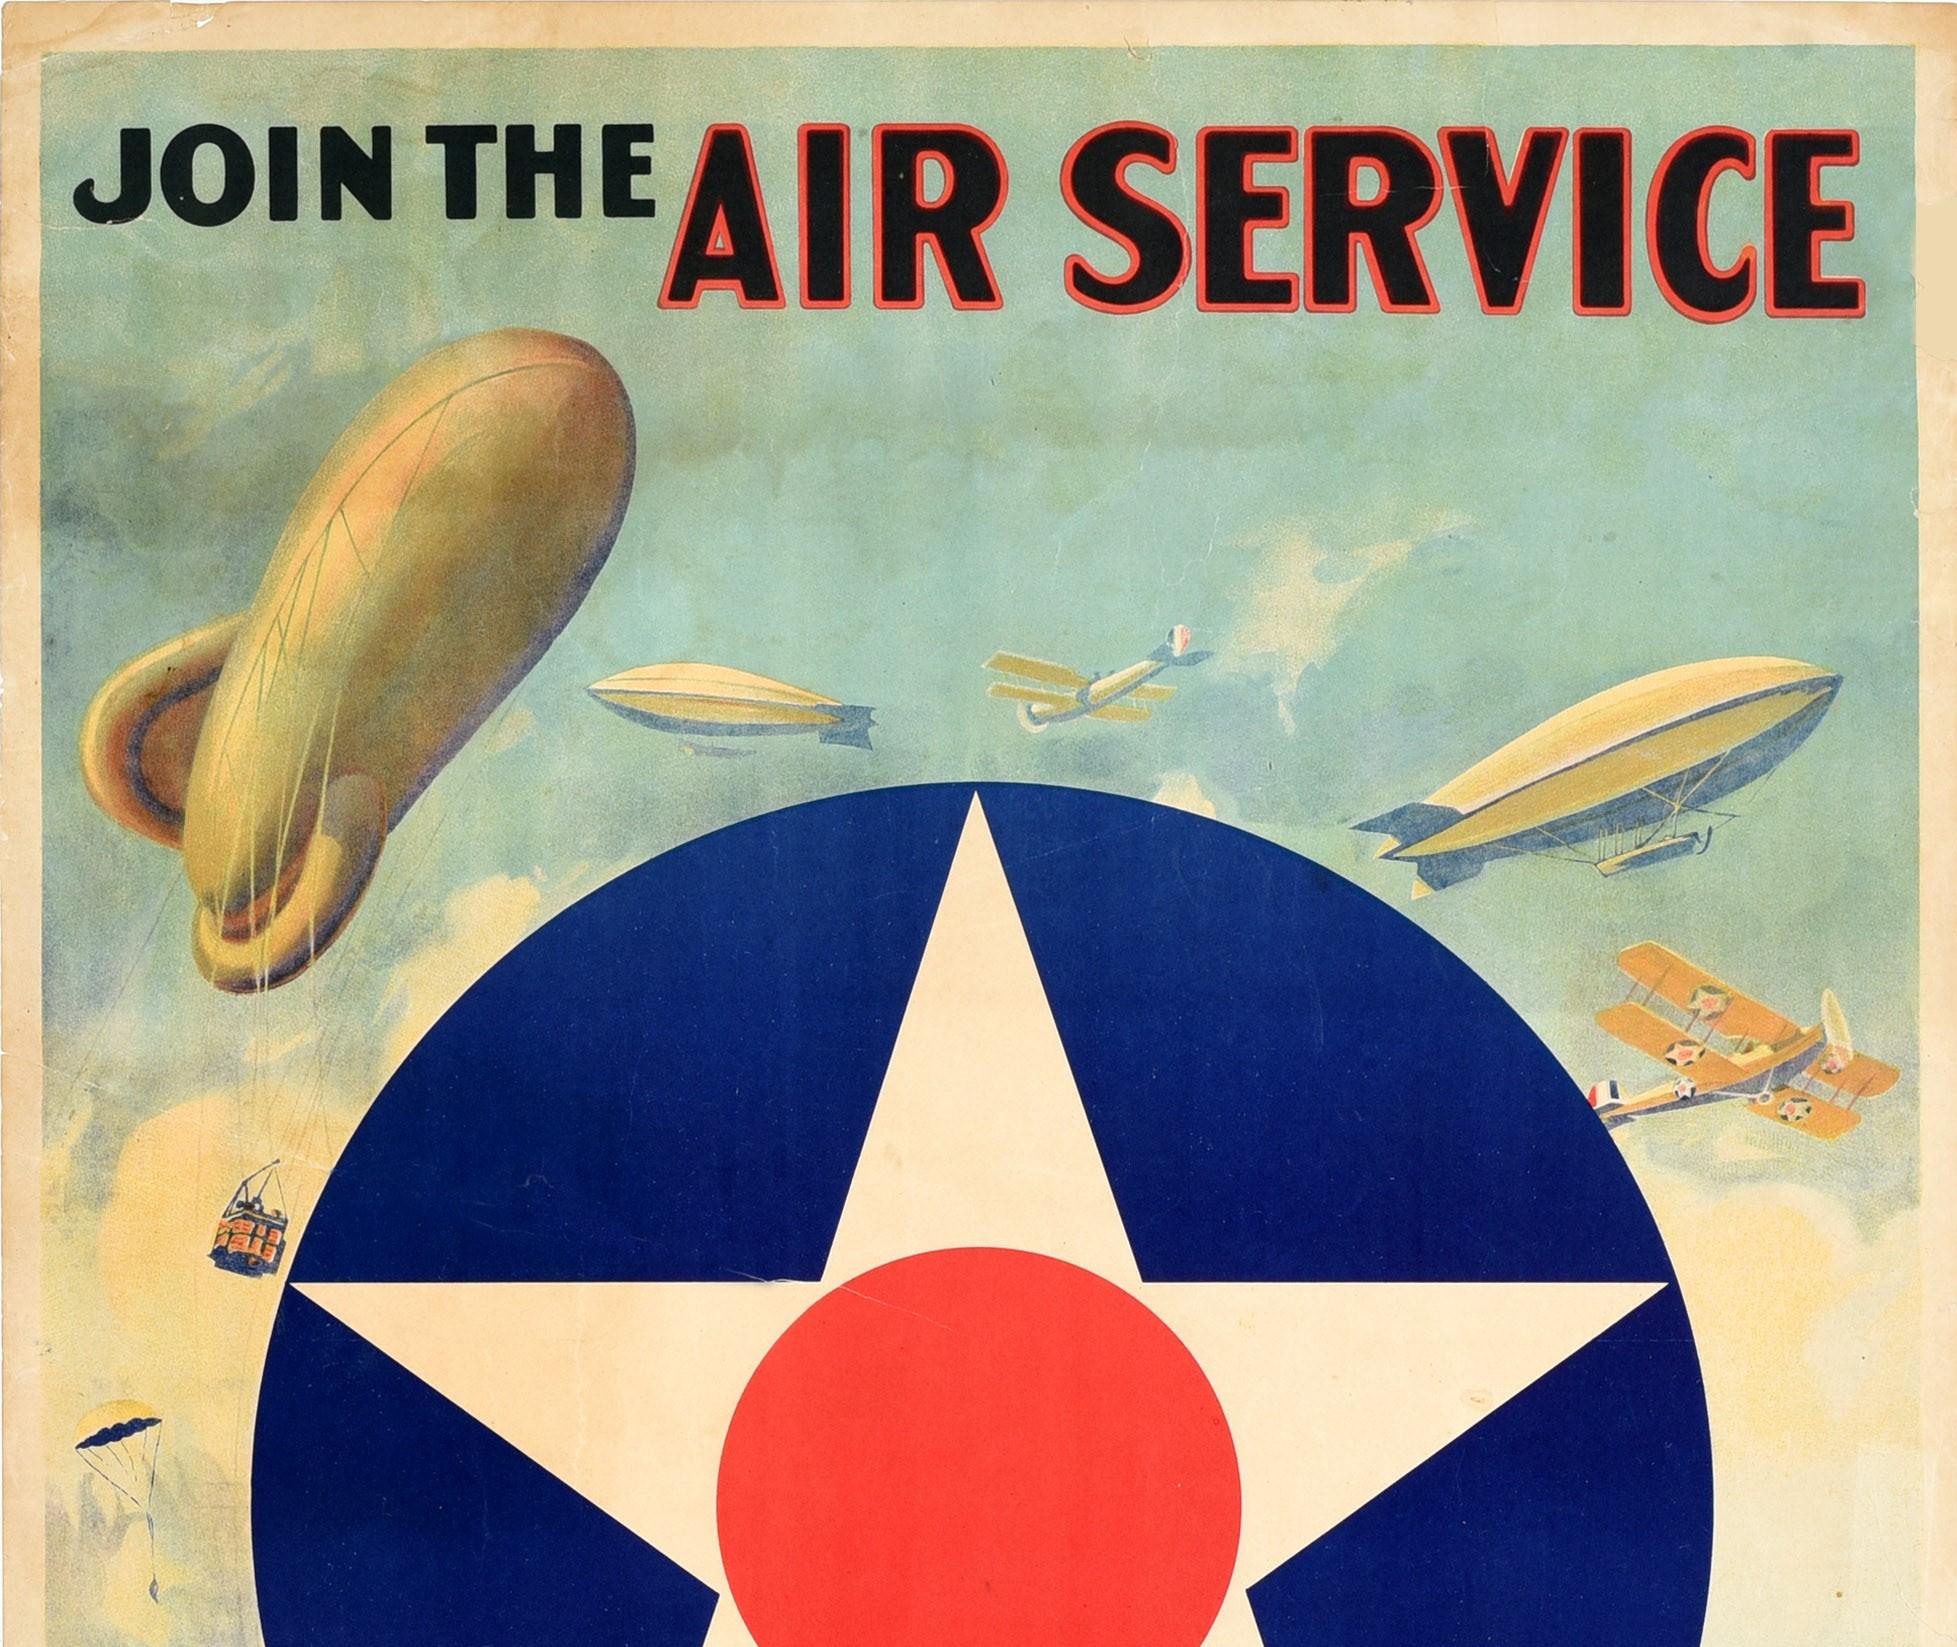 Original antique World War One US Air Force recruitment poster - Join the Air Service Learn Earn - featuring great artwork depicting various aircraft in the sky including a Zeppelin airship and bi-plane flying in a cloudy sky with a parachute on the